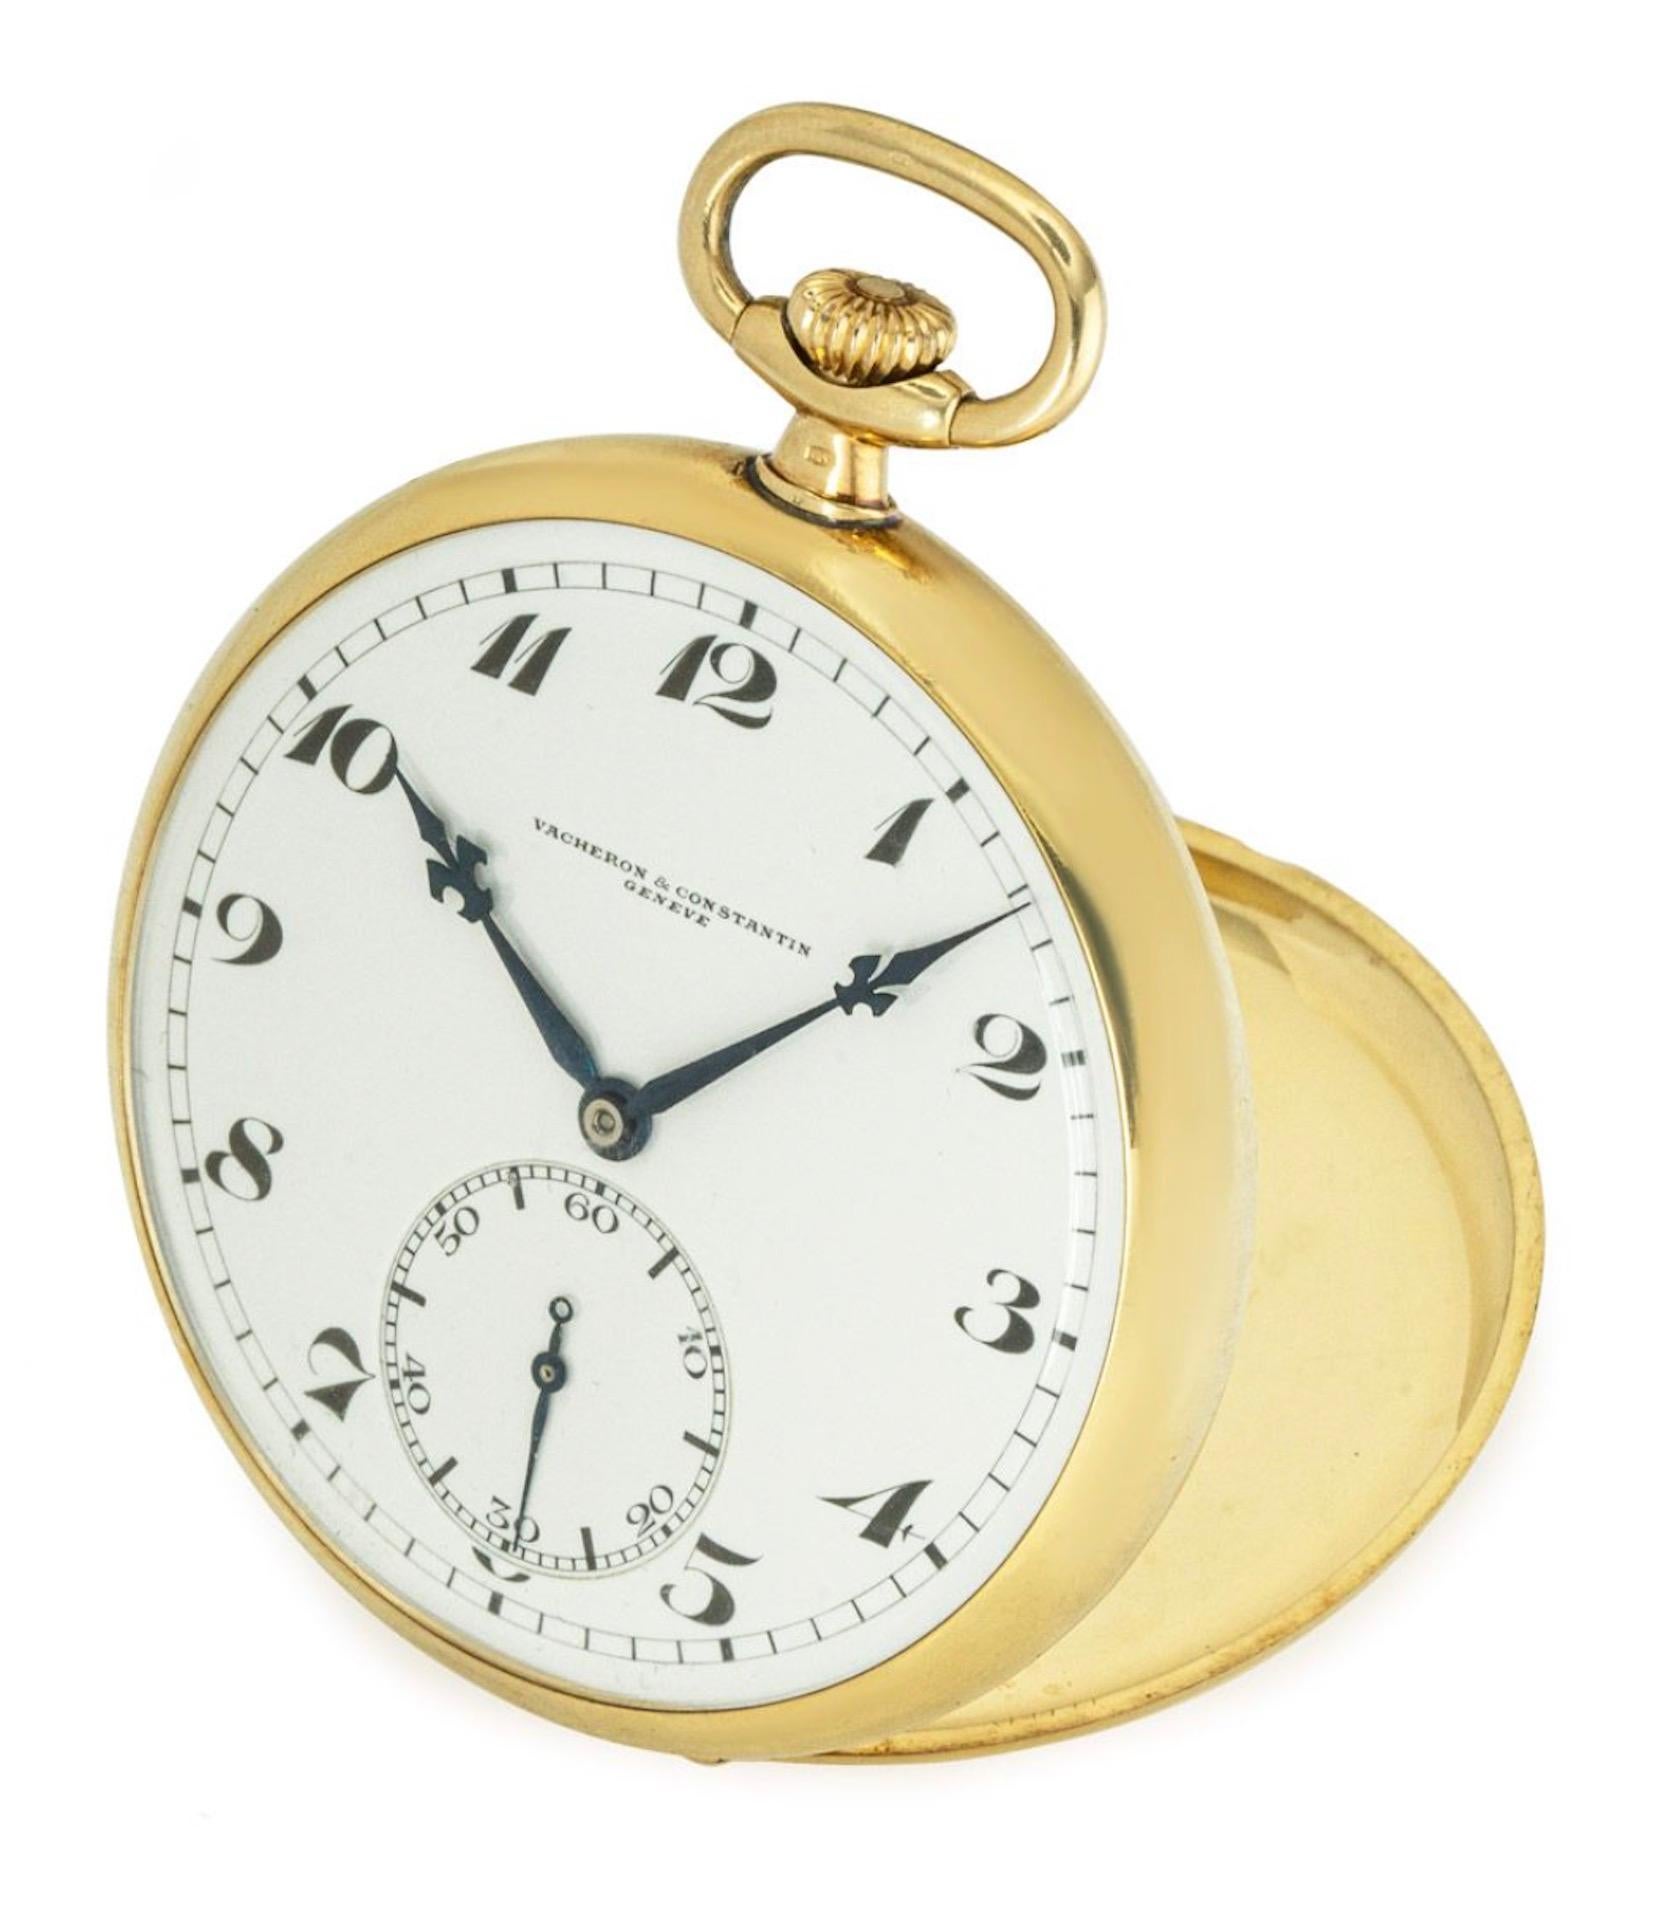 Vacheron & Constantin. An 18ct Yellow Gold Keyless Lever Dress Pocket Watch C1920s.

Dial: The excellent White enamel dial fully signed Vacheron & Constantin Geneva with black Arabic numerals, outer minute track and subsidiary seconds dial at six